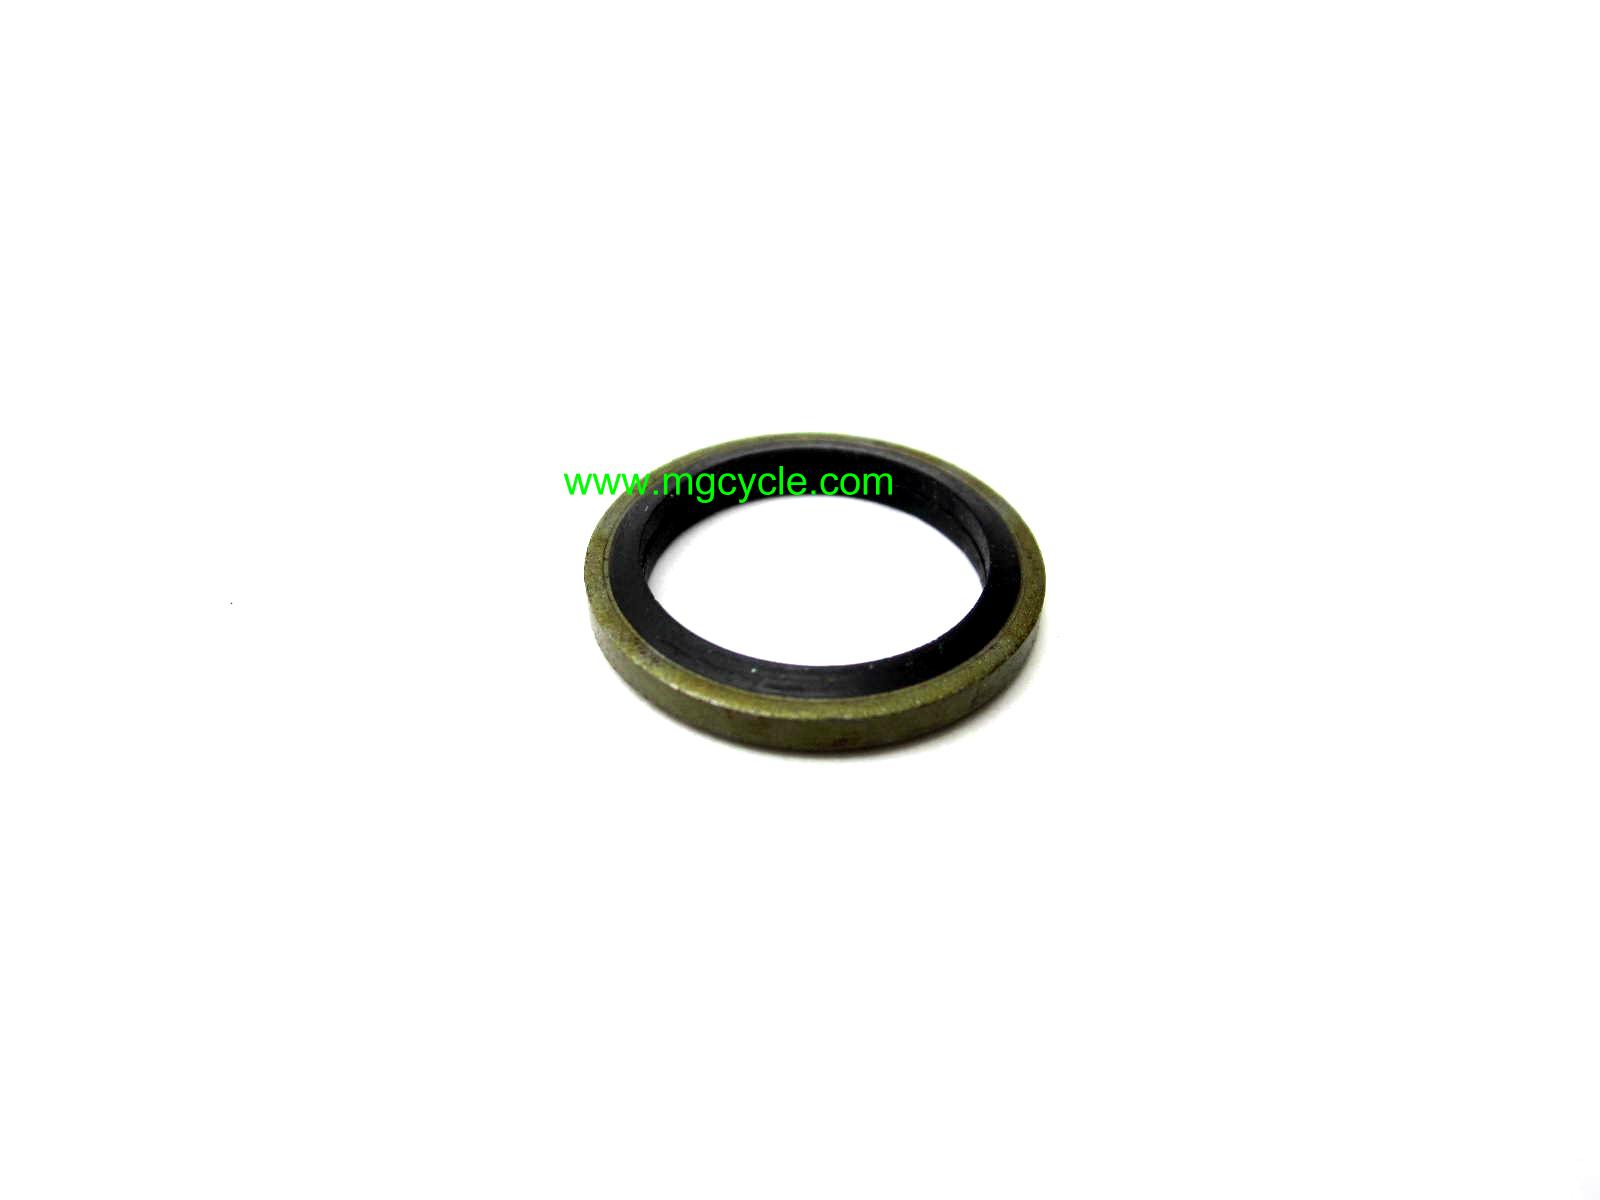 16mm ID sealing washer with rubber seal many models 1999 on